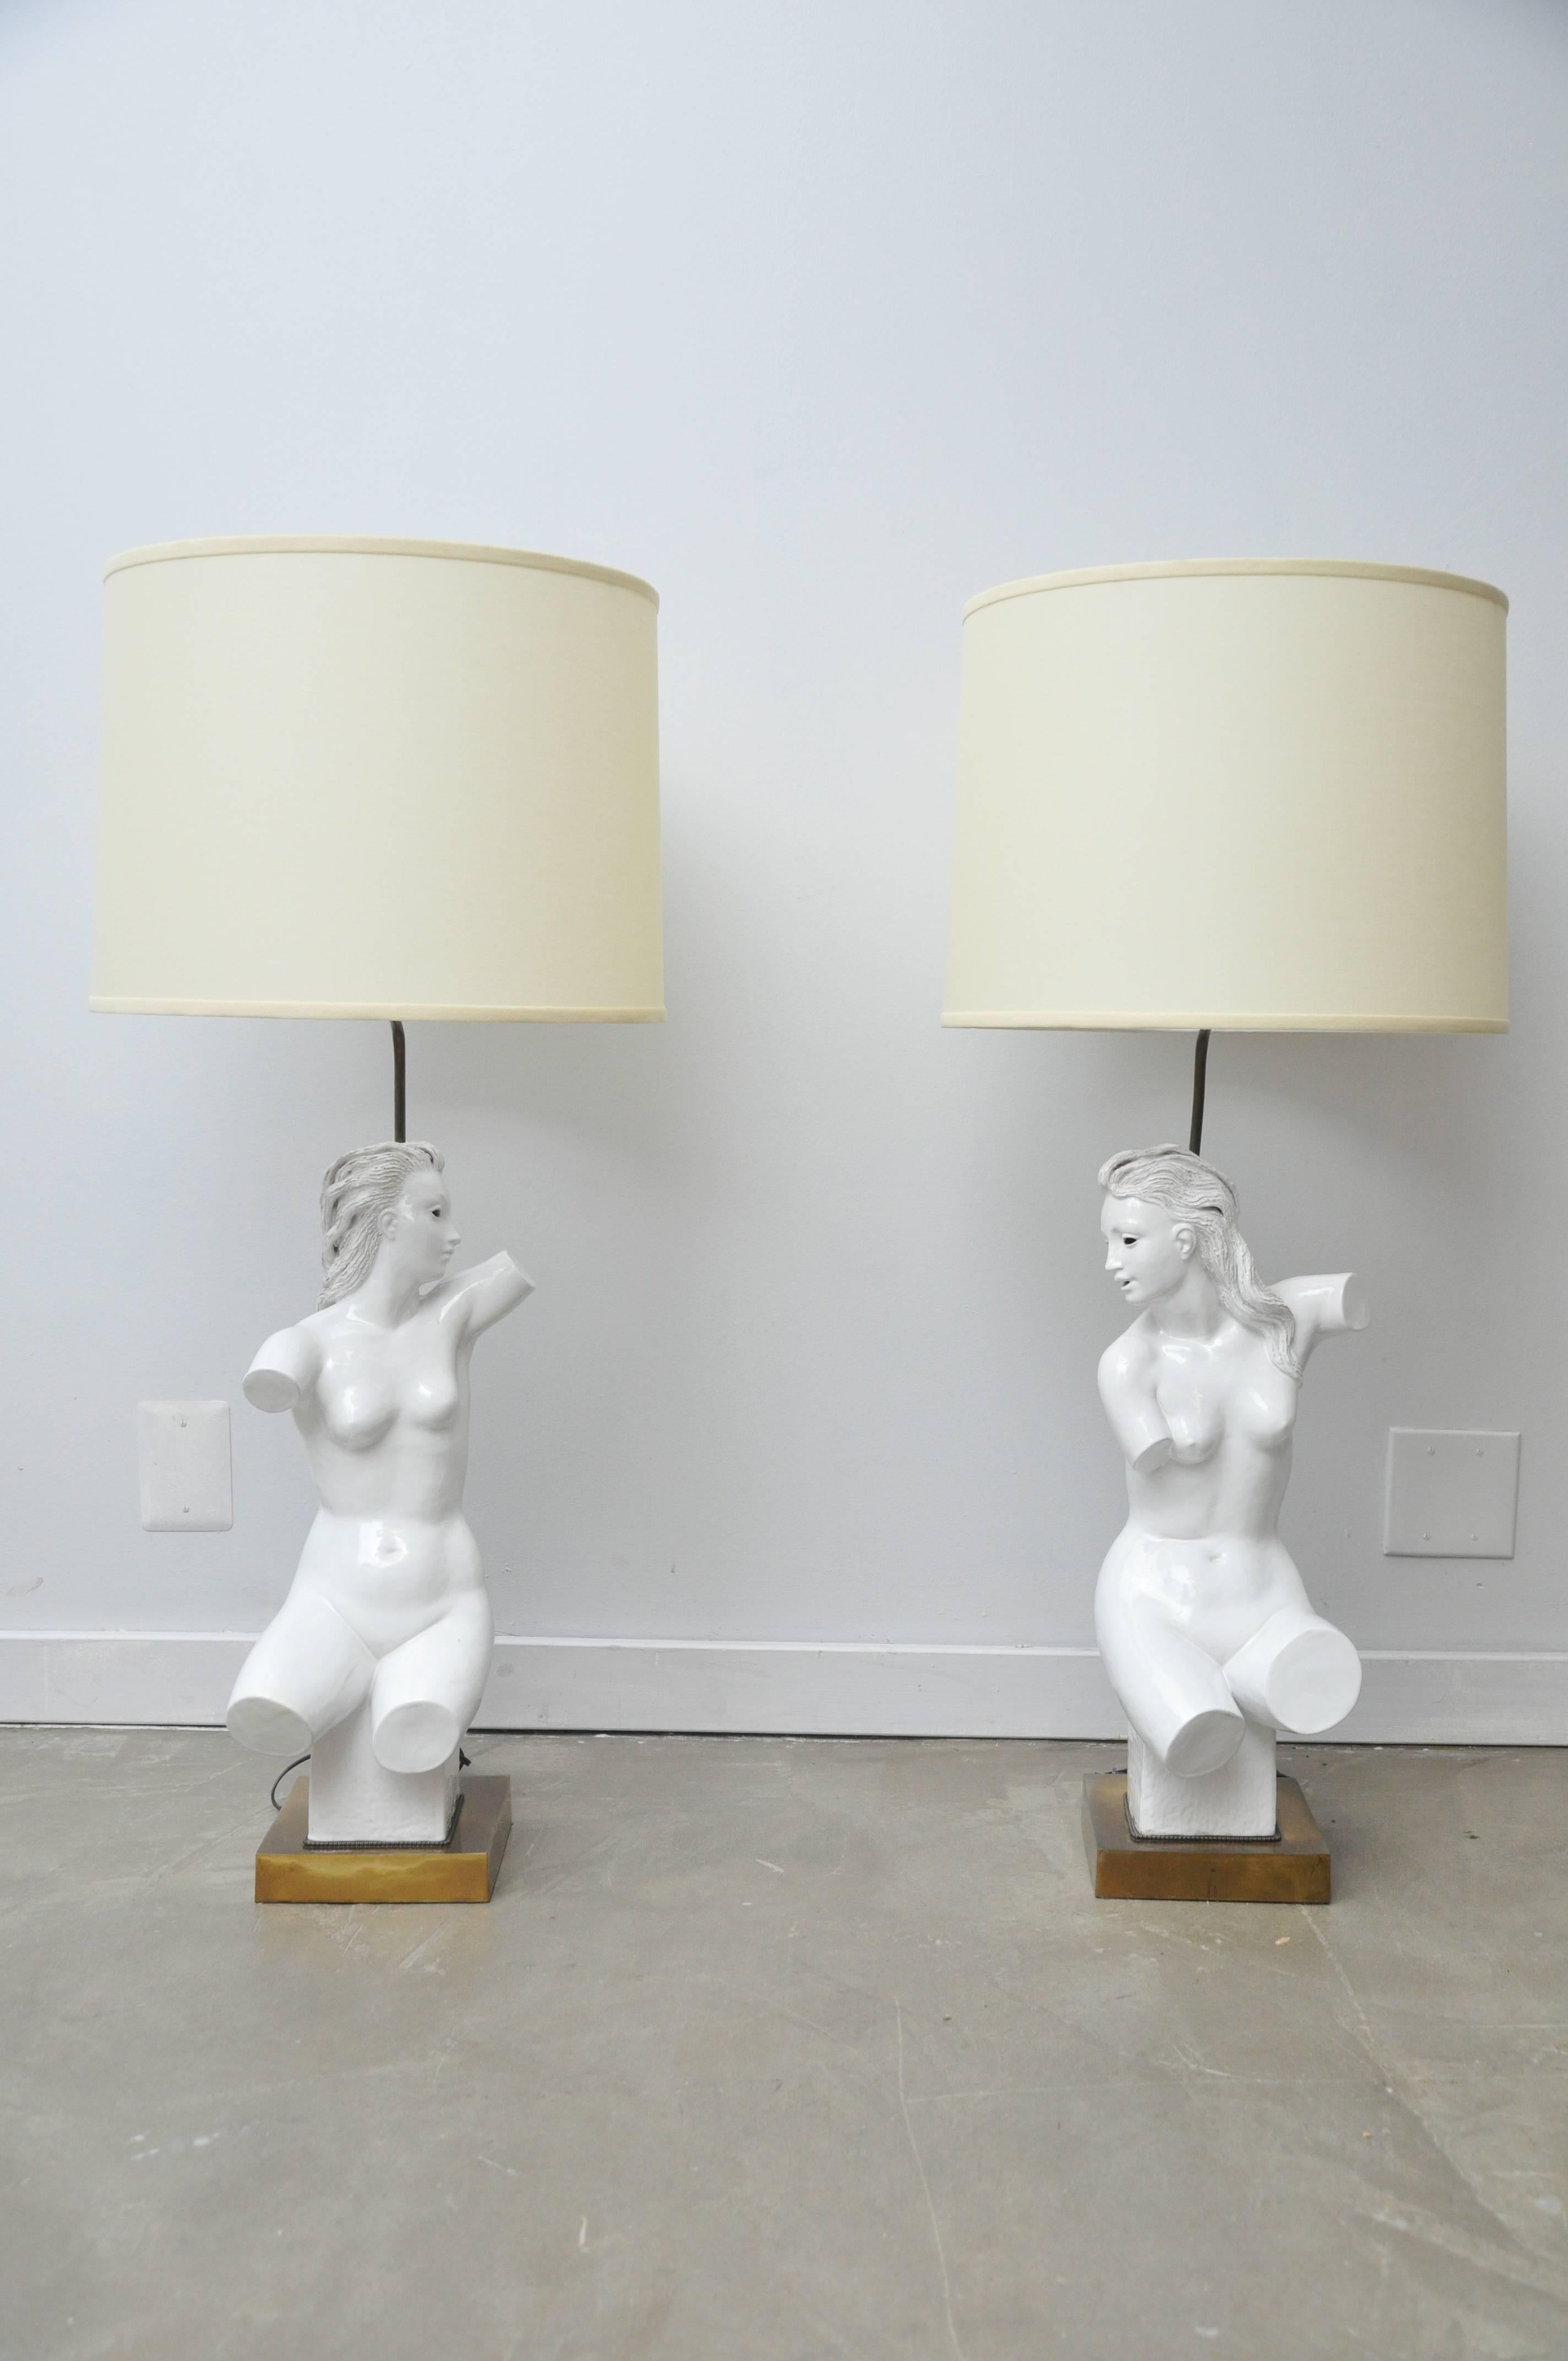 Pair of table lamps, each depicting a nude female figure
white ceramic figure on brass base, with dark silk cord
signed Zaccagnini, A 902, made in Italy. New shades.

Illustrated: 
Kelly Wearstler, Rhapsody, Rizzoli International, 2012.

 